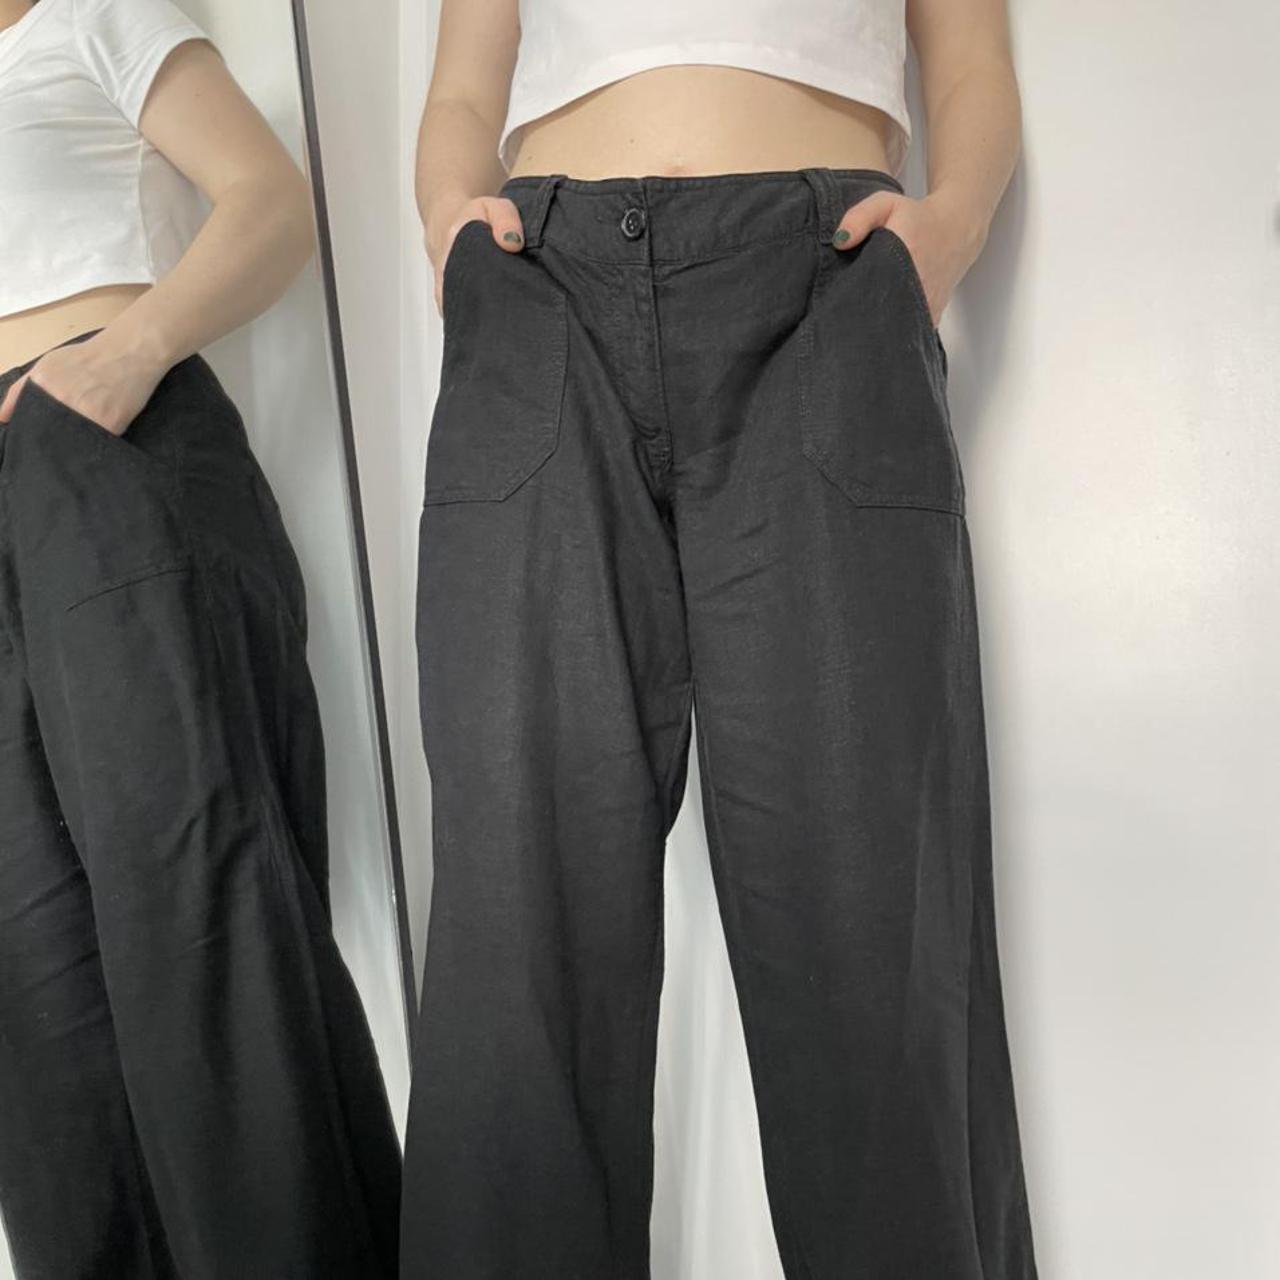 Product Image 2 - Petite black cargo pants

In excellent